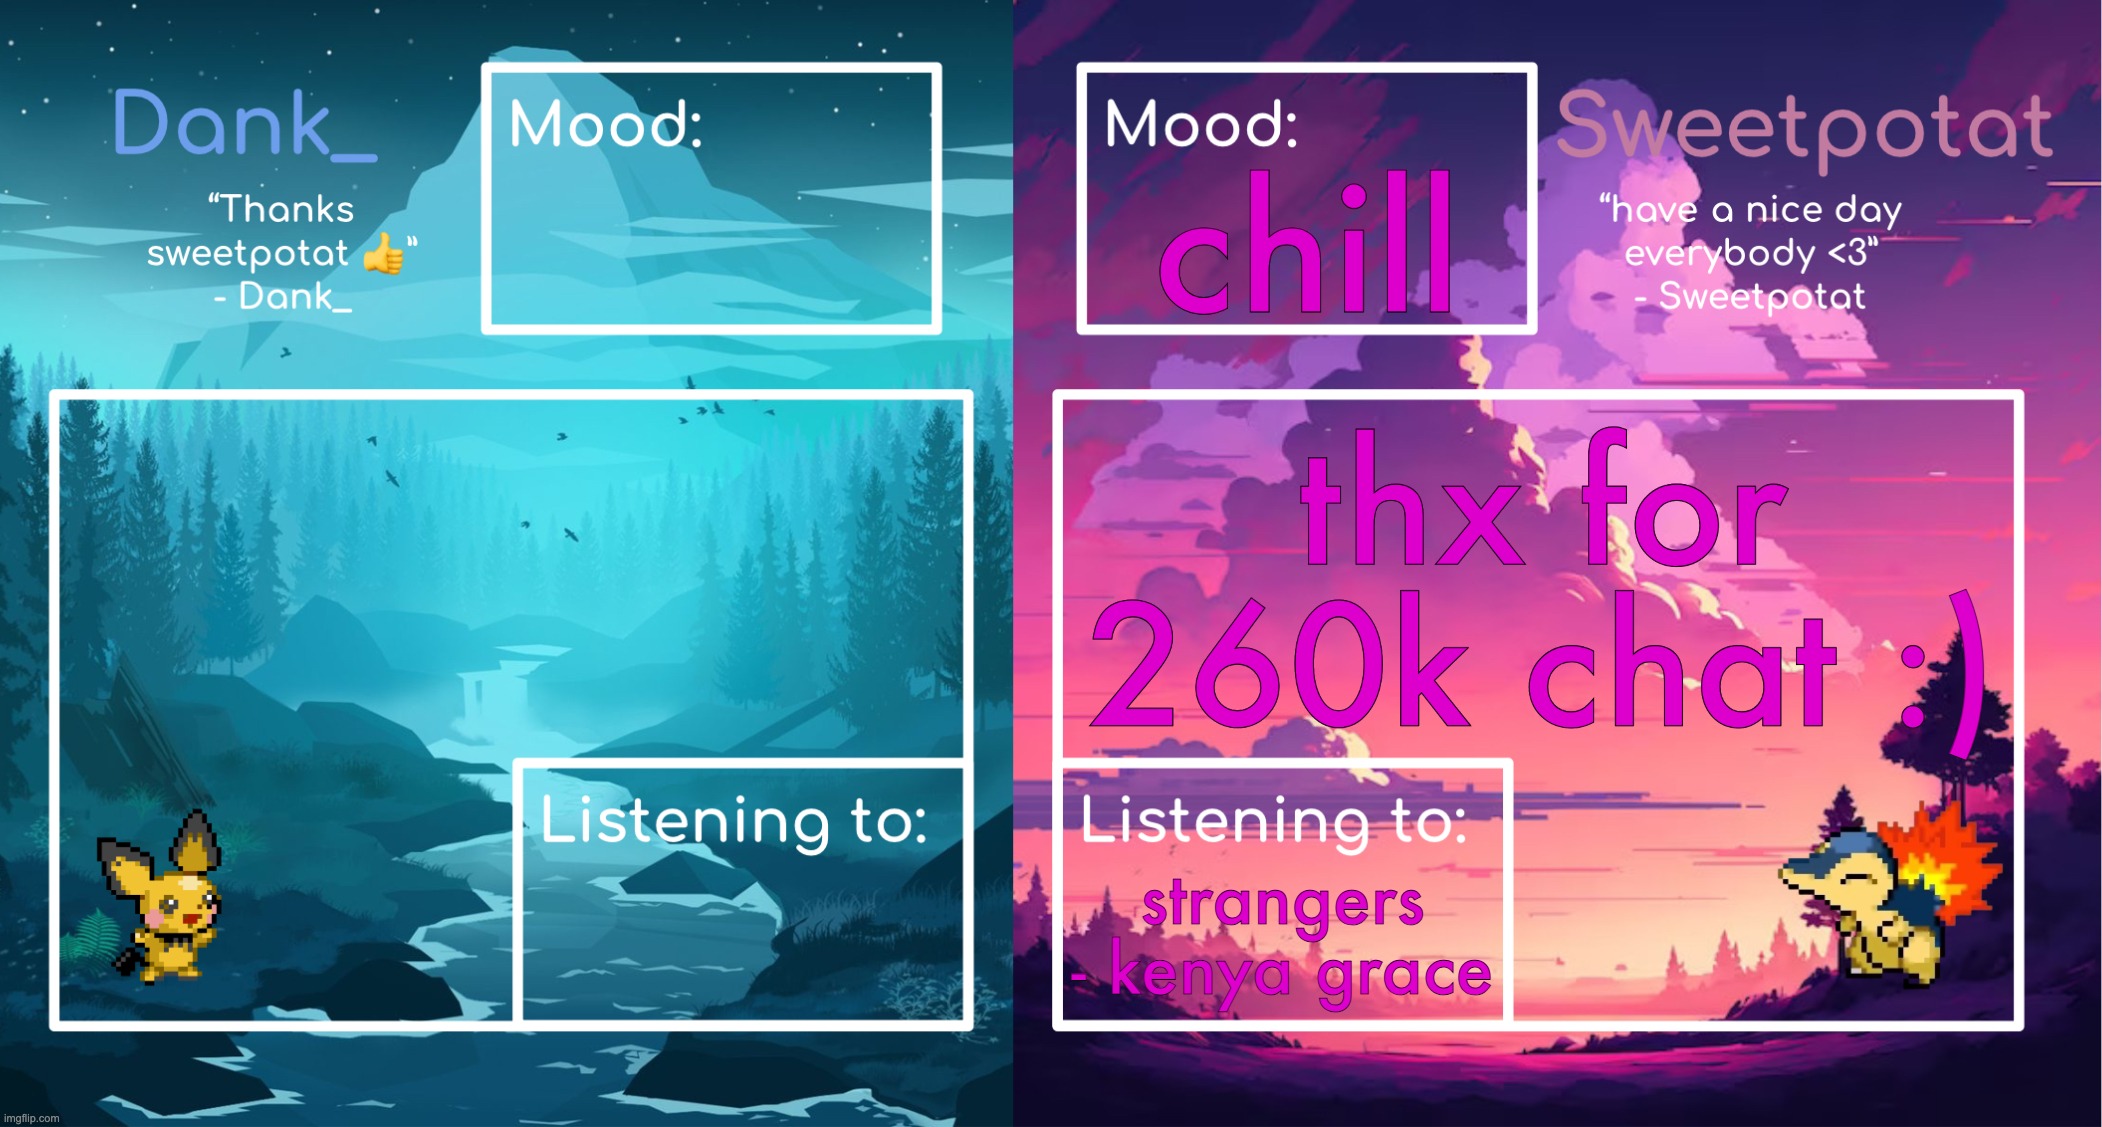 yey 20k to go | chill; thx for 260k chat :); strangers - kenya grace | image tagged in dank and sweetpotat shared temp | made w/ Imgflip meme maker